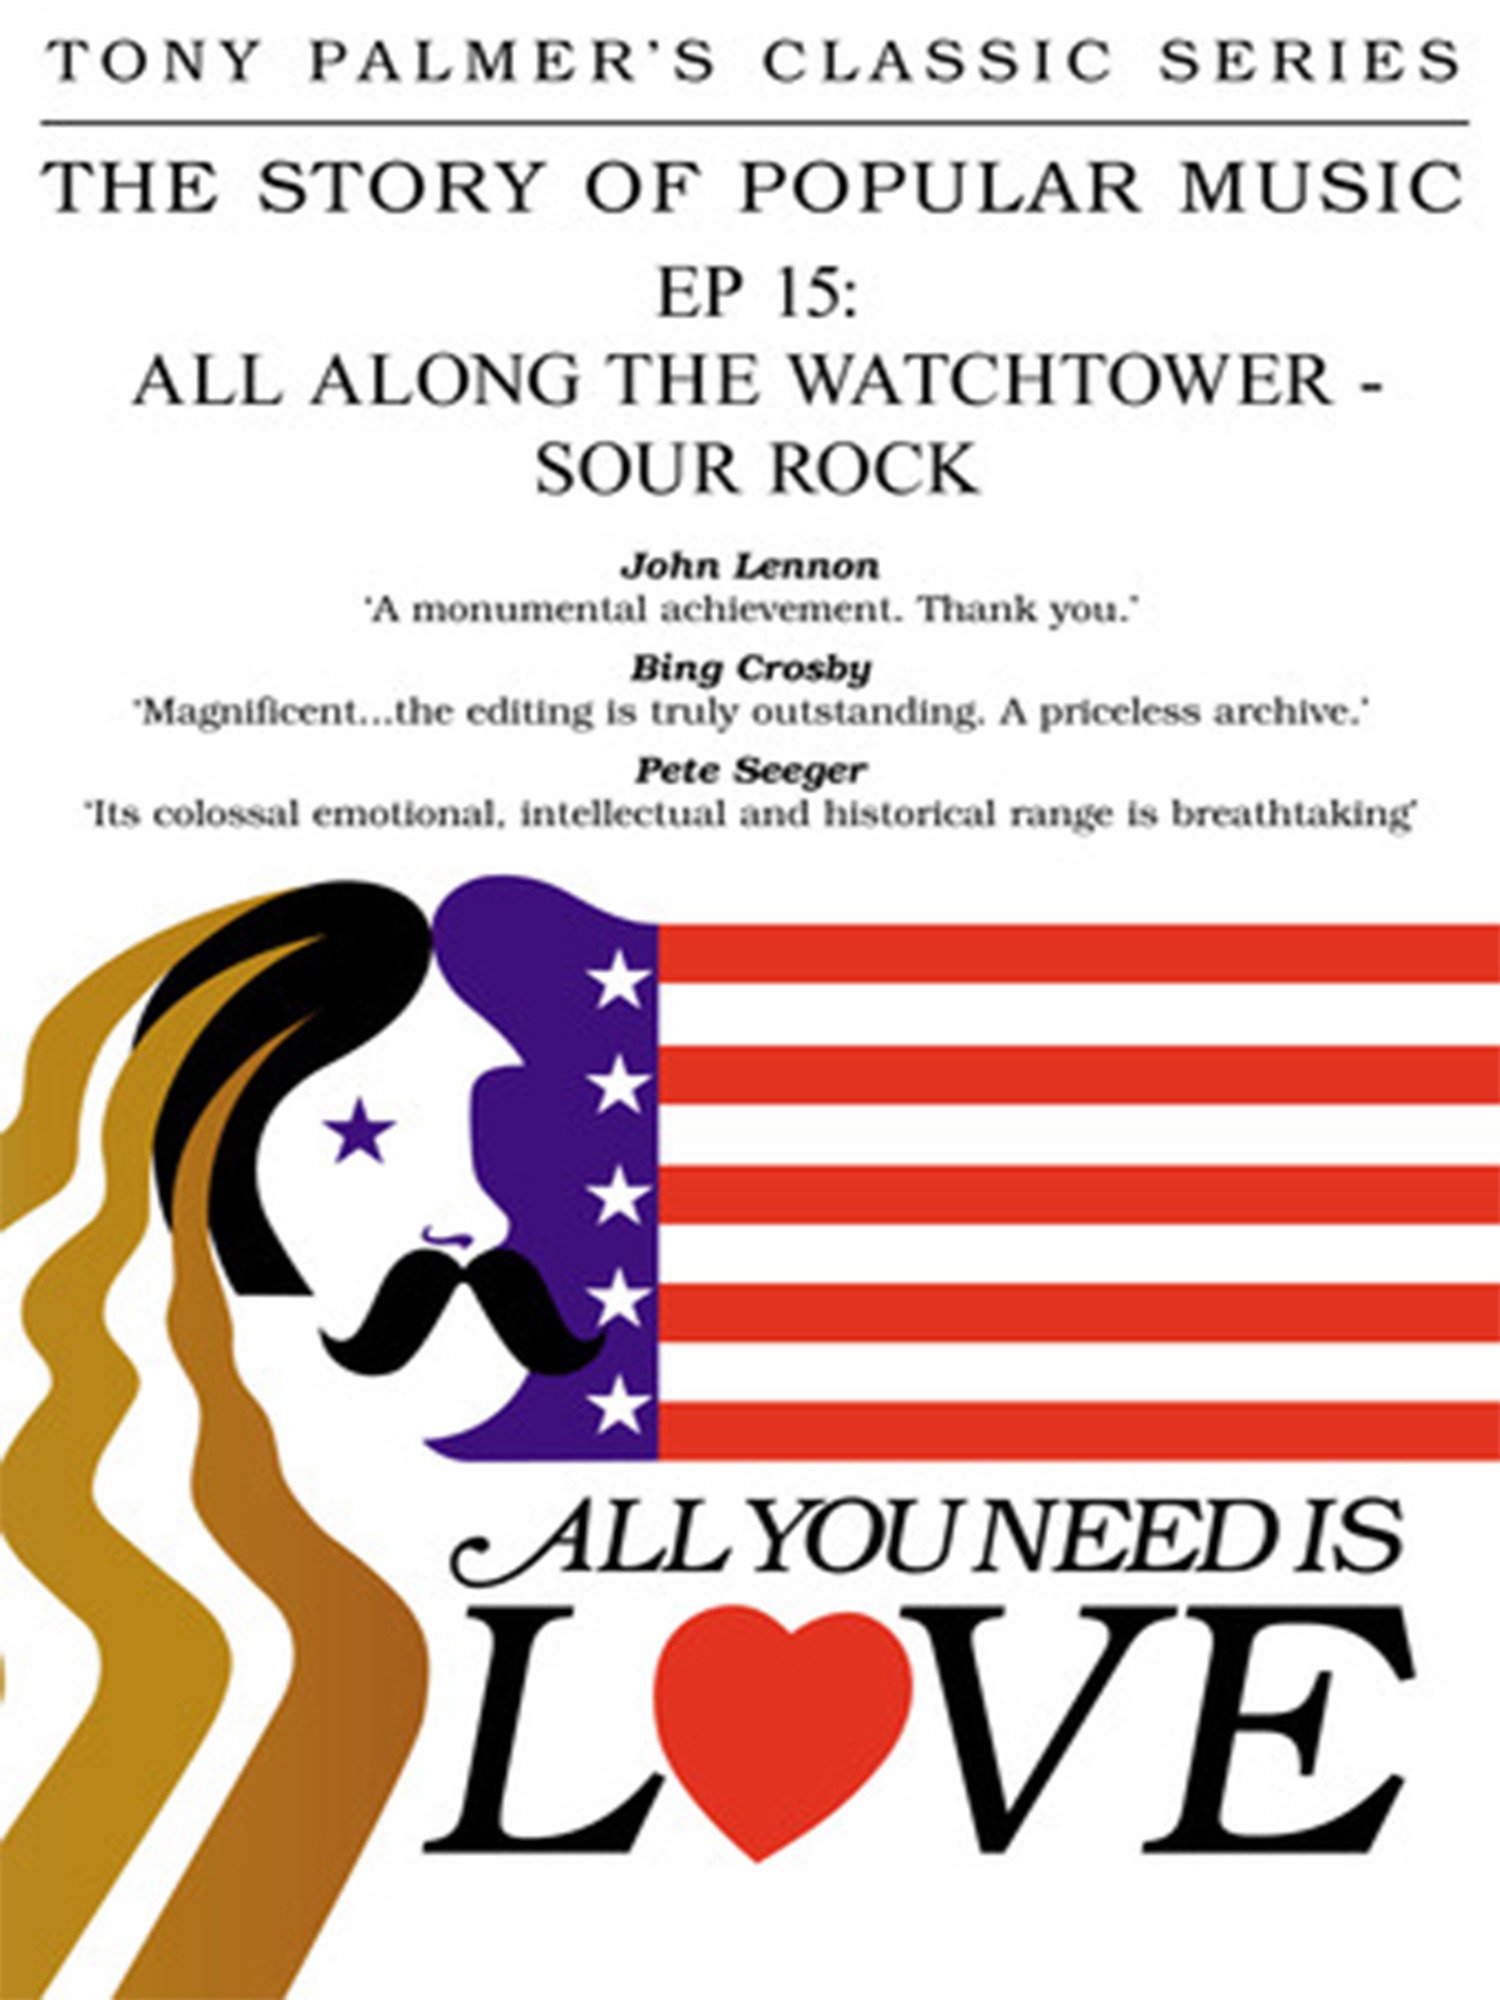 All you need is love: All along the Watchtower